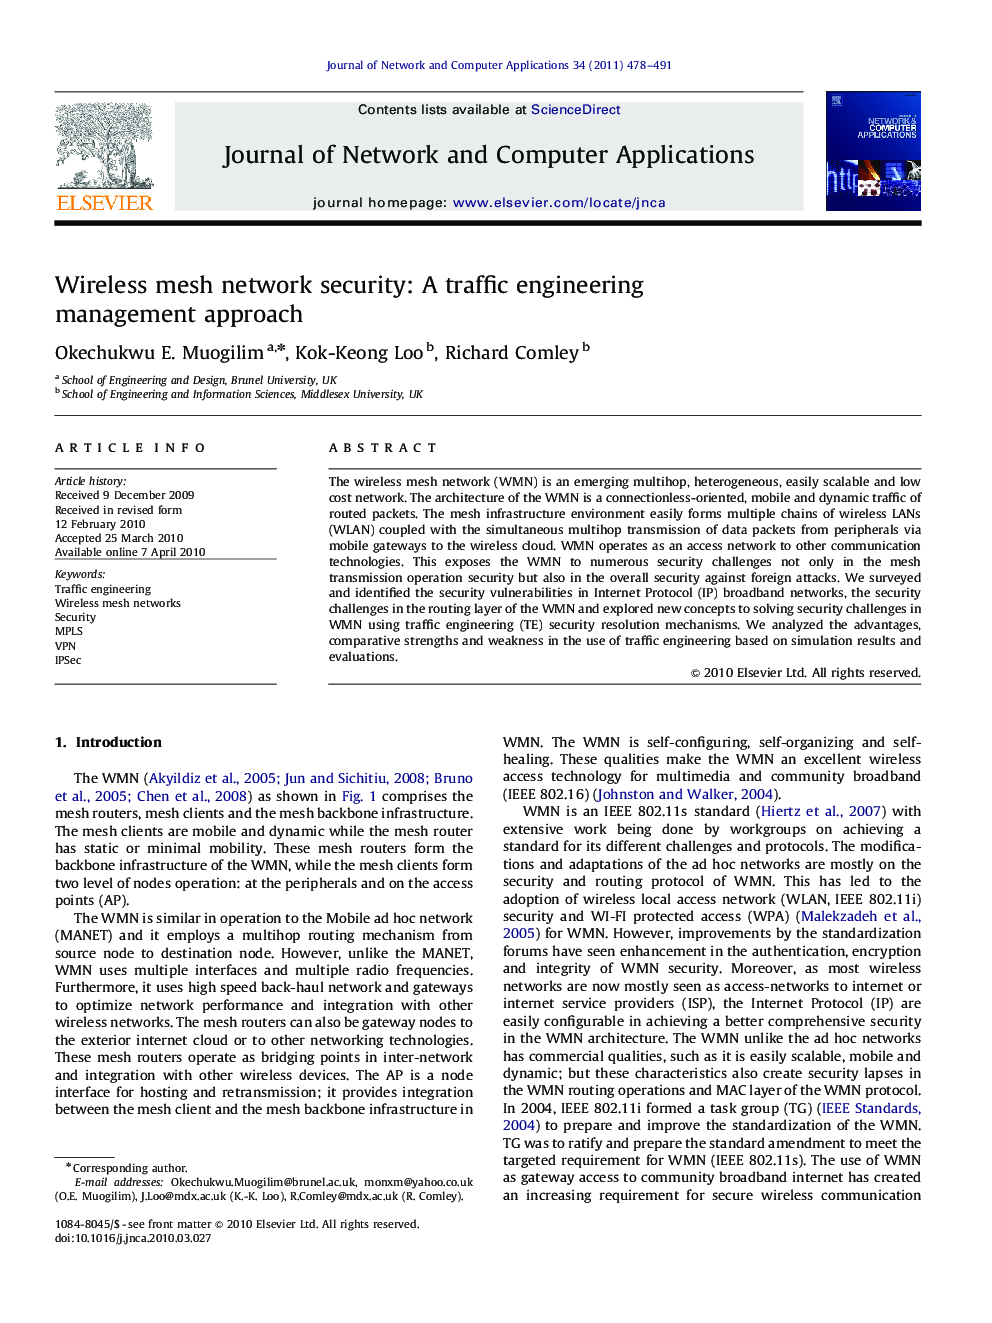 Wireless mesh network security: A traffic engineering management approach